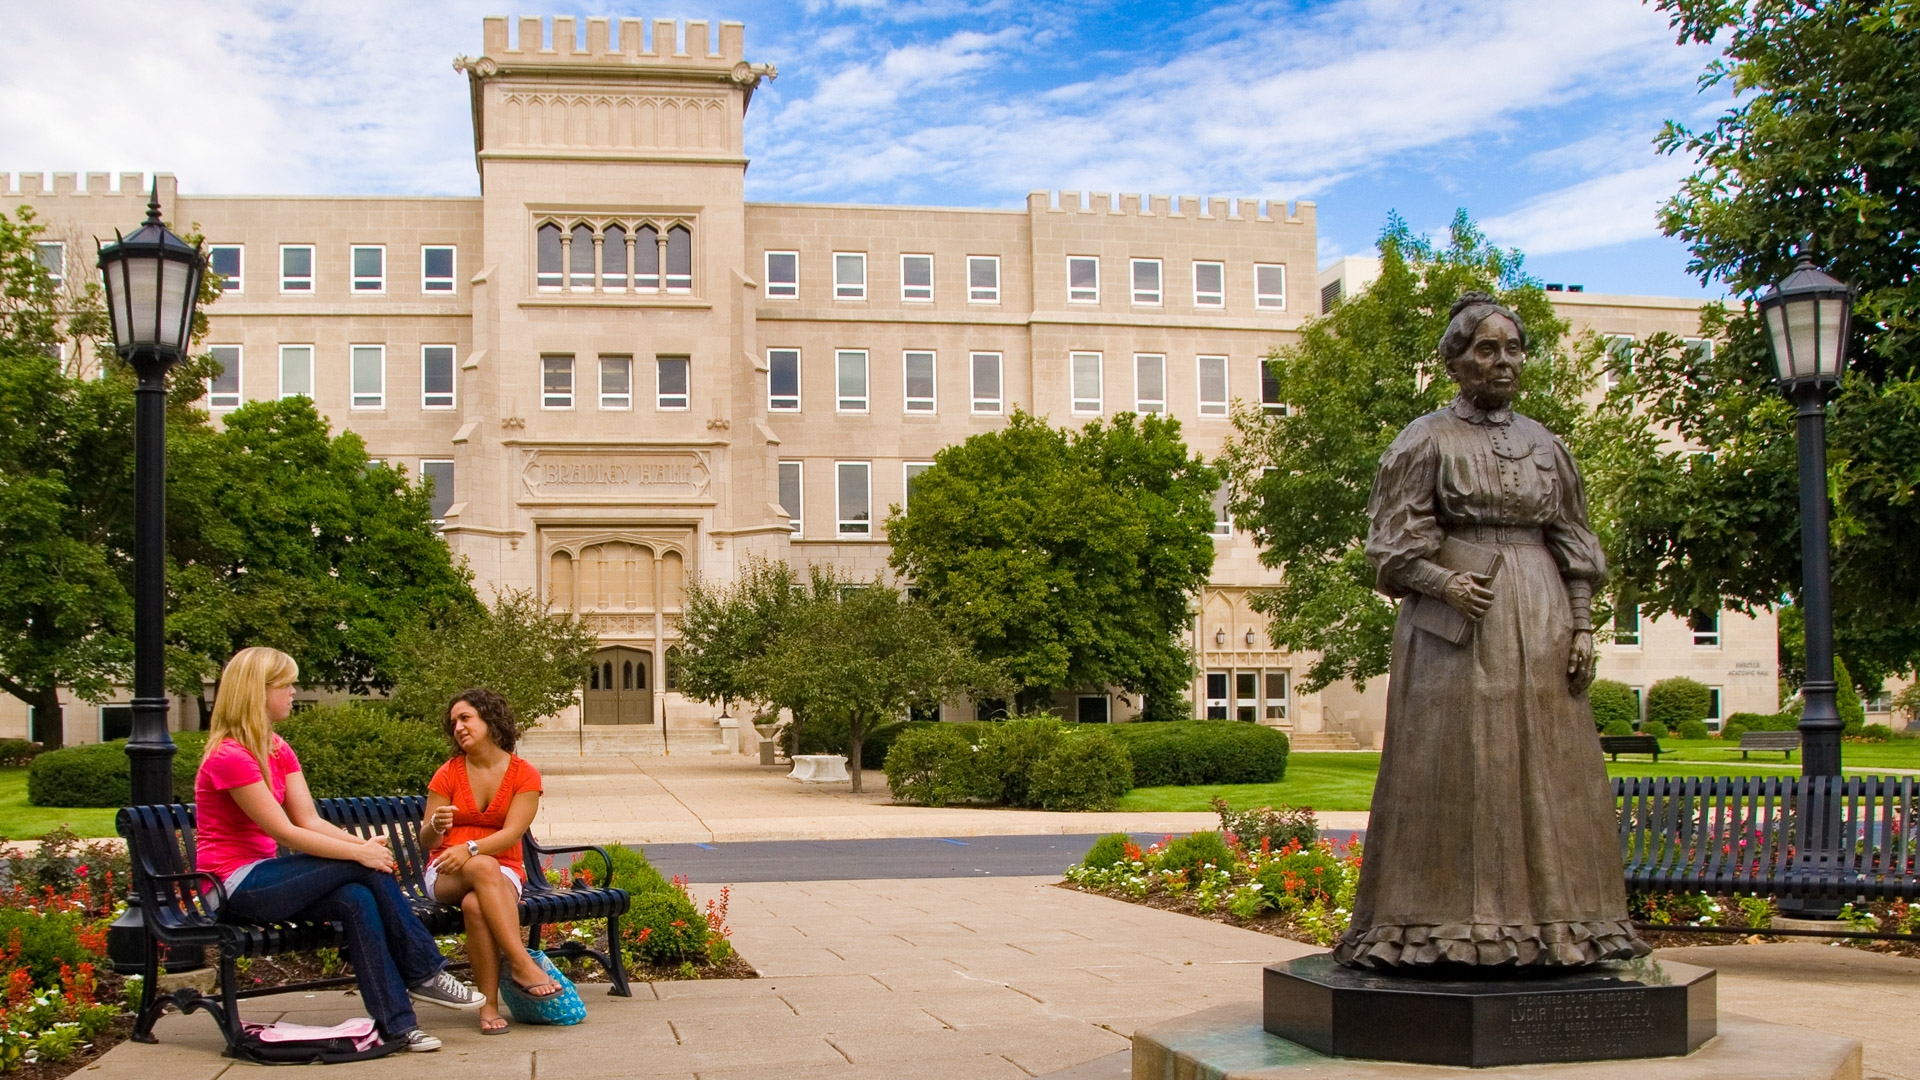 A statue of Bradley University founder, Lydia Moss Bradley, watches over the 85-acre campus.